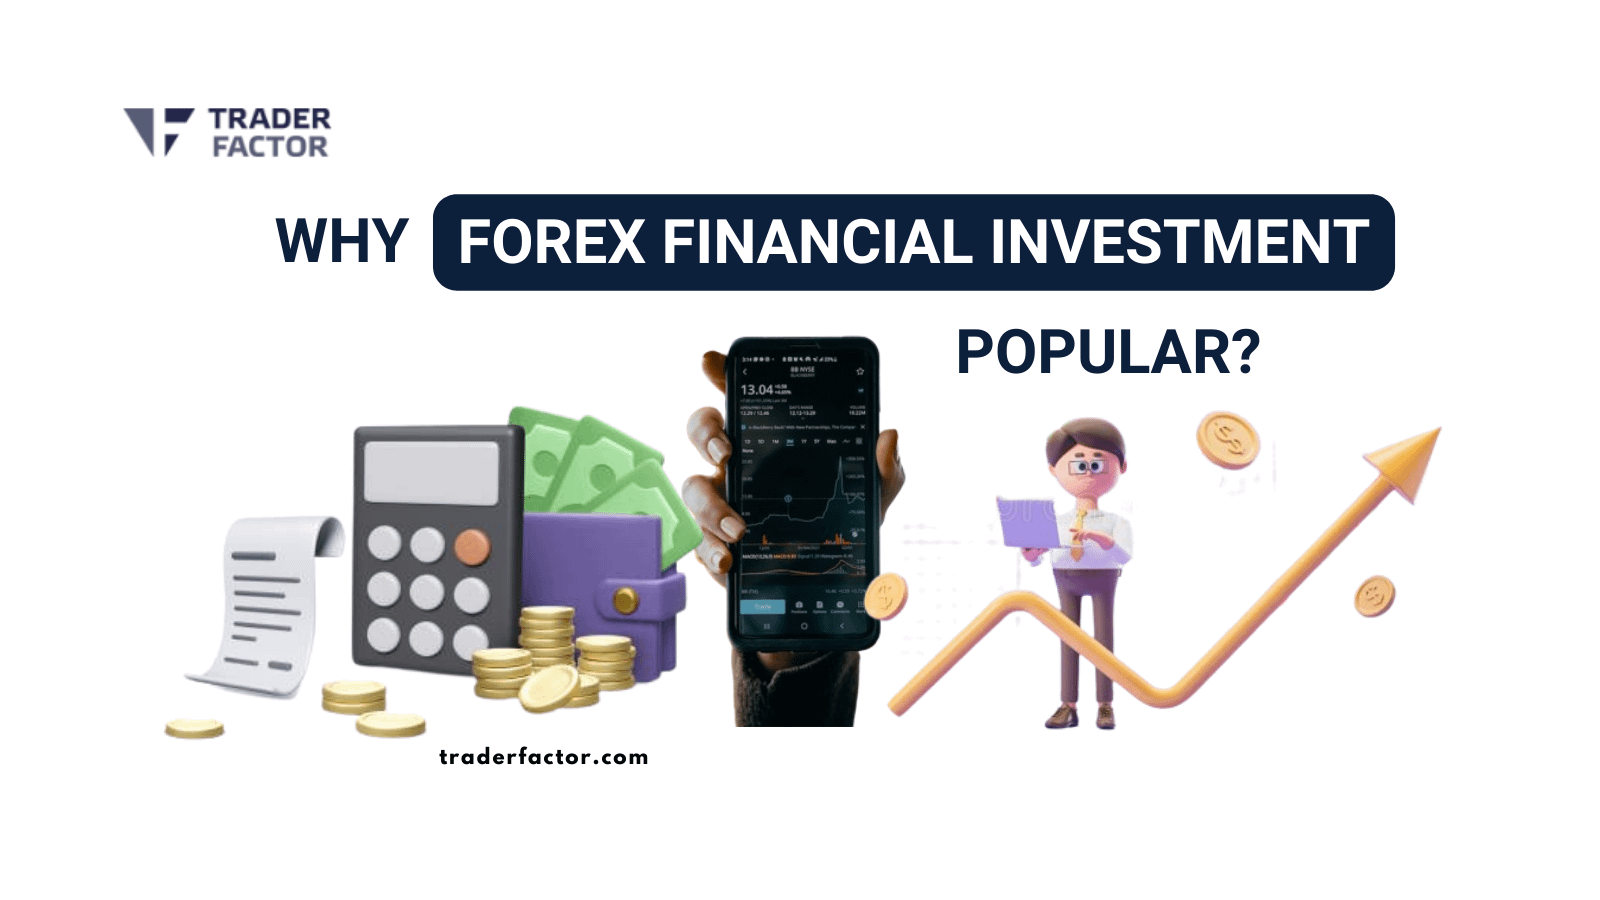 Why Forex Financial Investment popular?